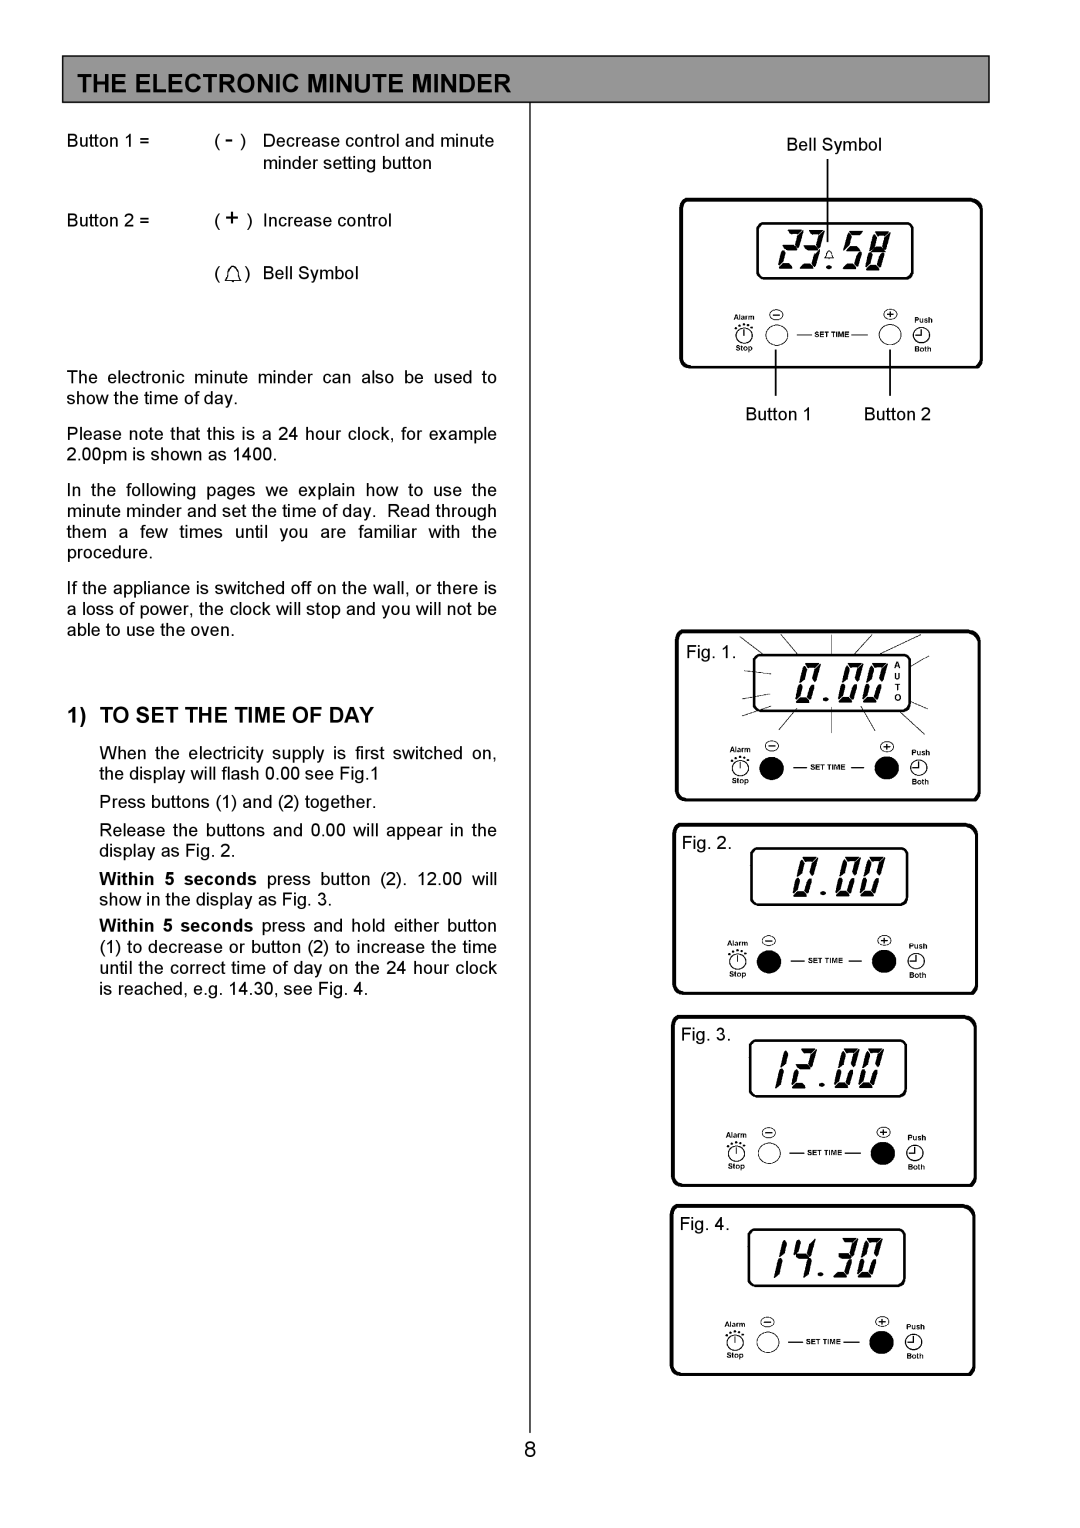 Electrolux SM 554 installation instructions Electronic Minute Minder, To SET the Time of DAY 